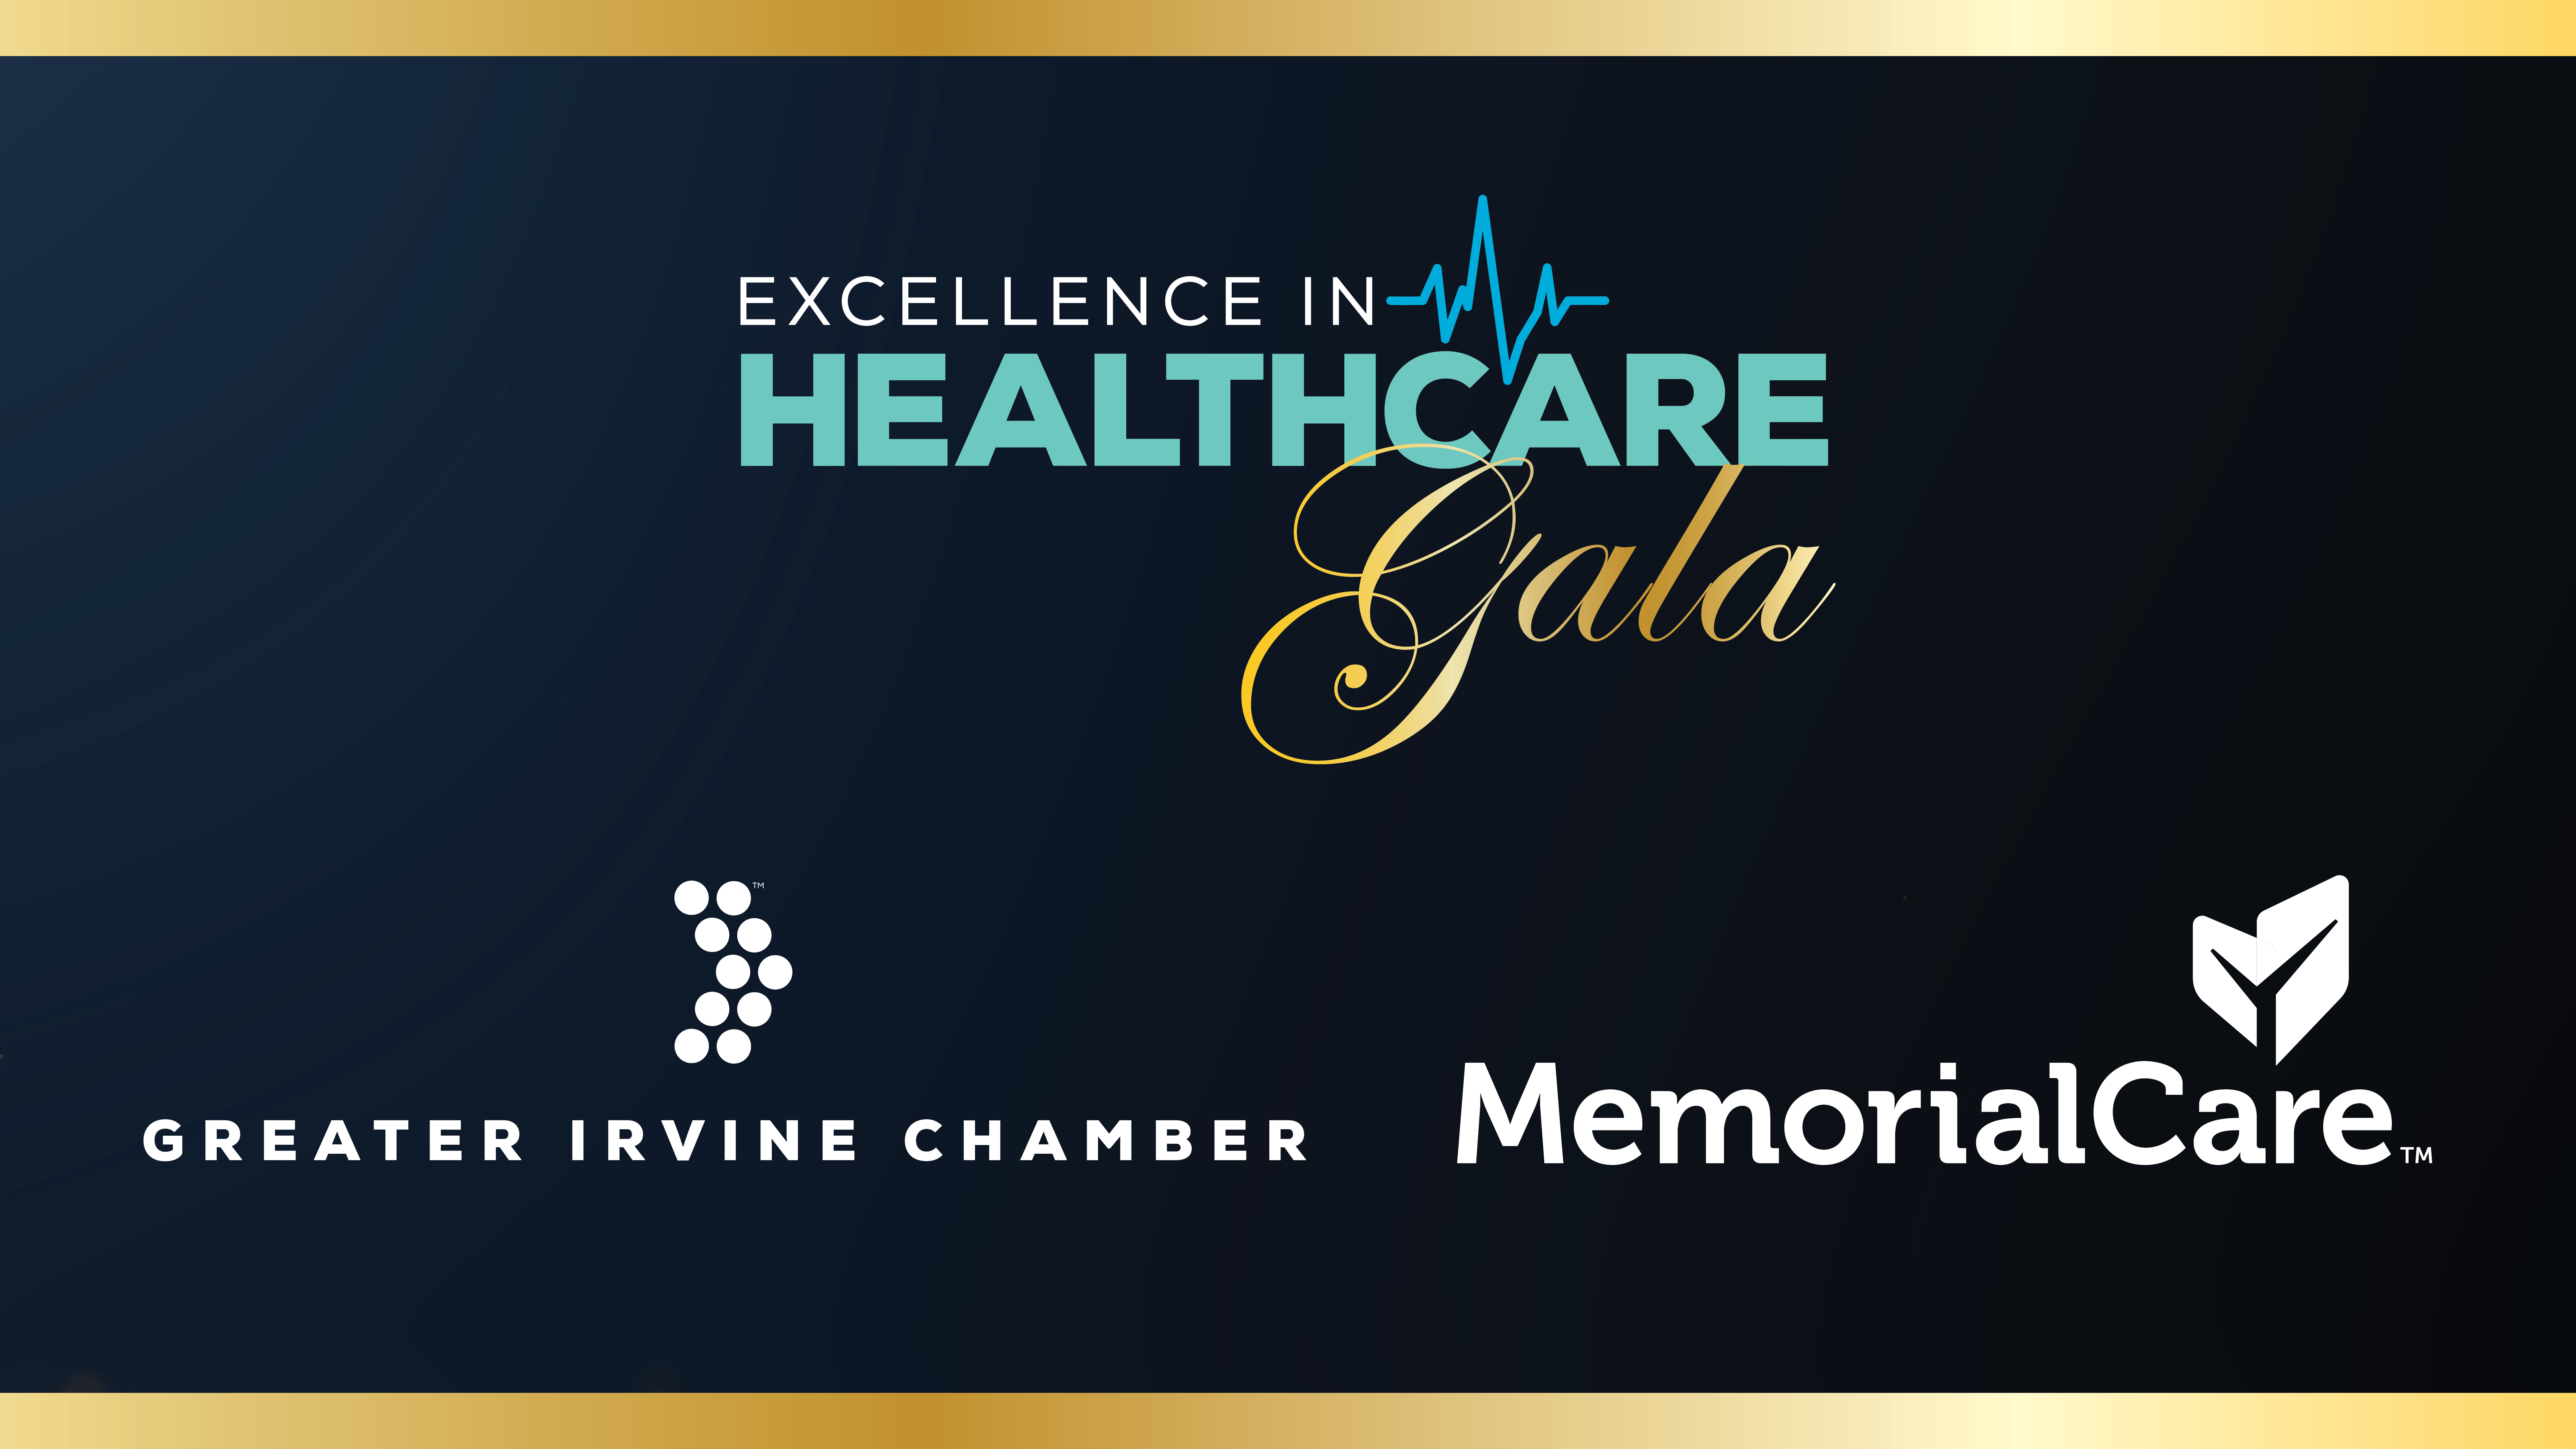 Excellence in Healthcare - MC sponsor banner